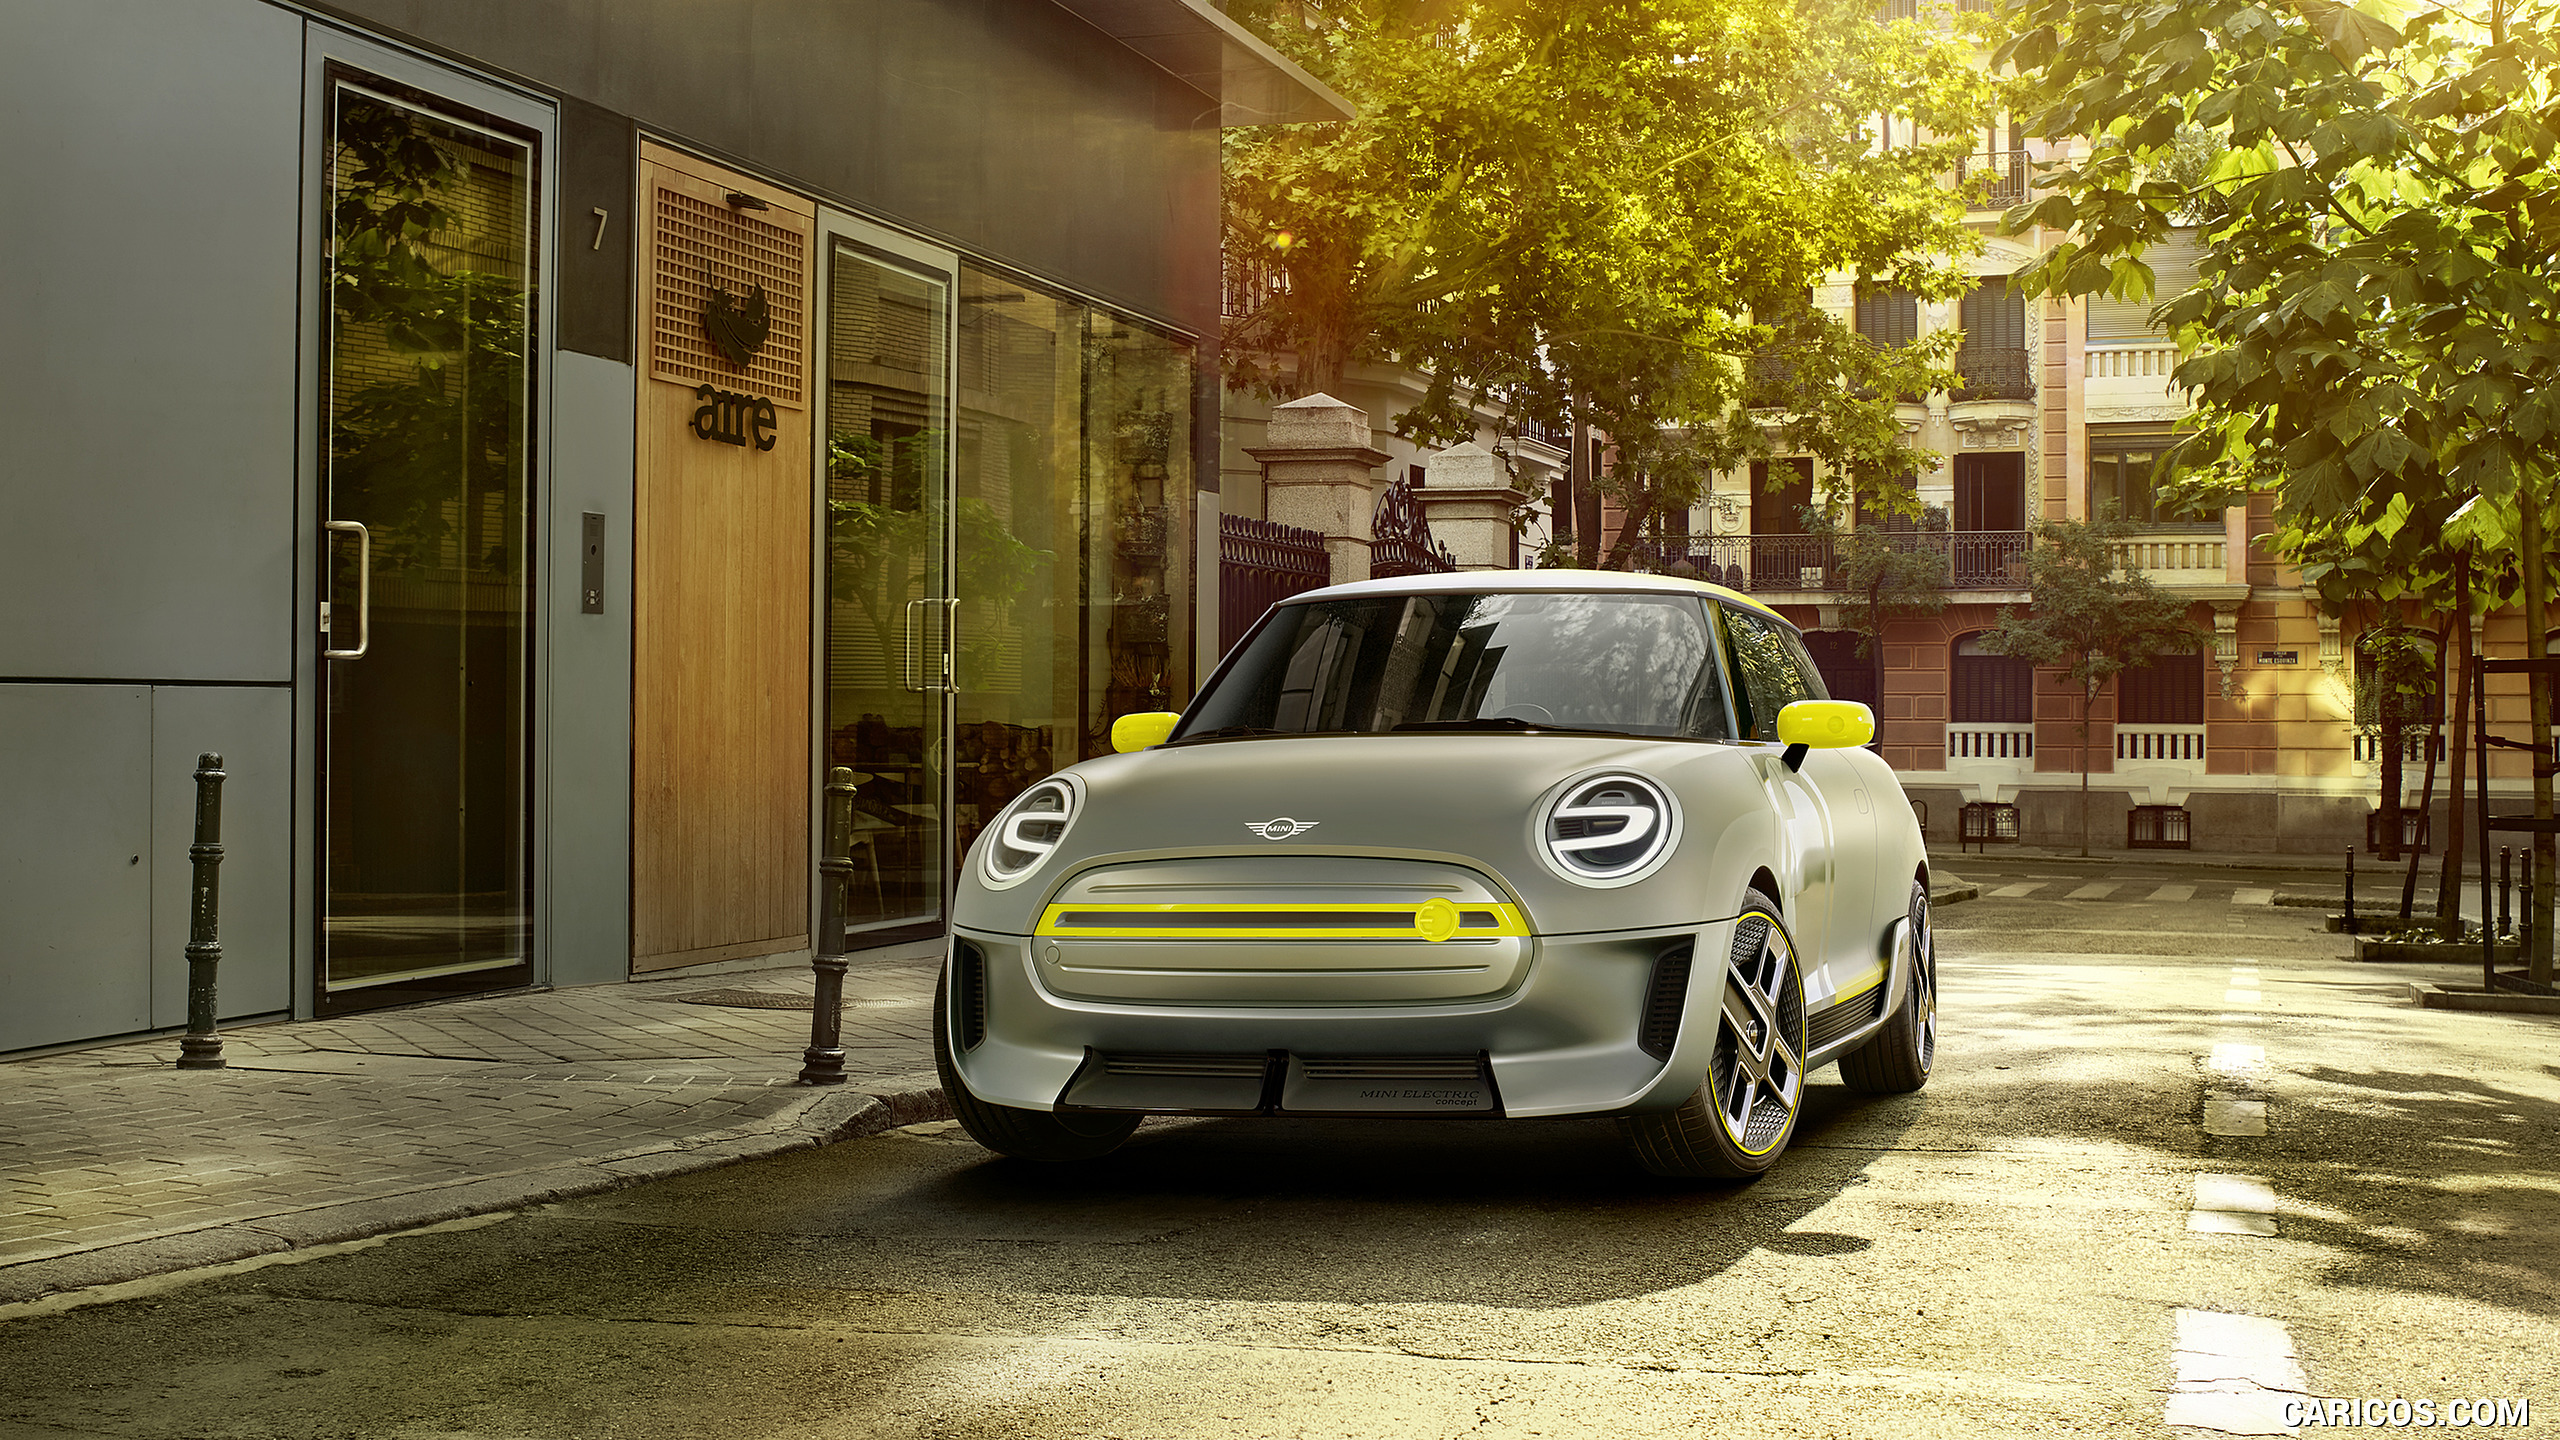 2018 MINI Electric Concept - Front, #8 of 19